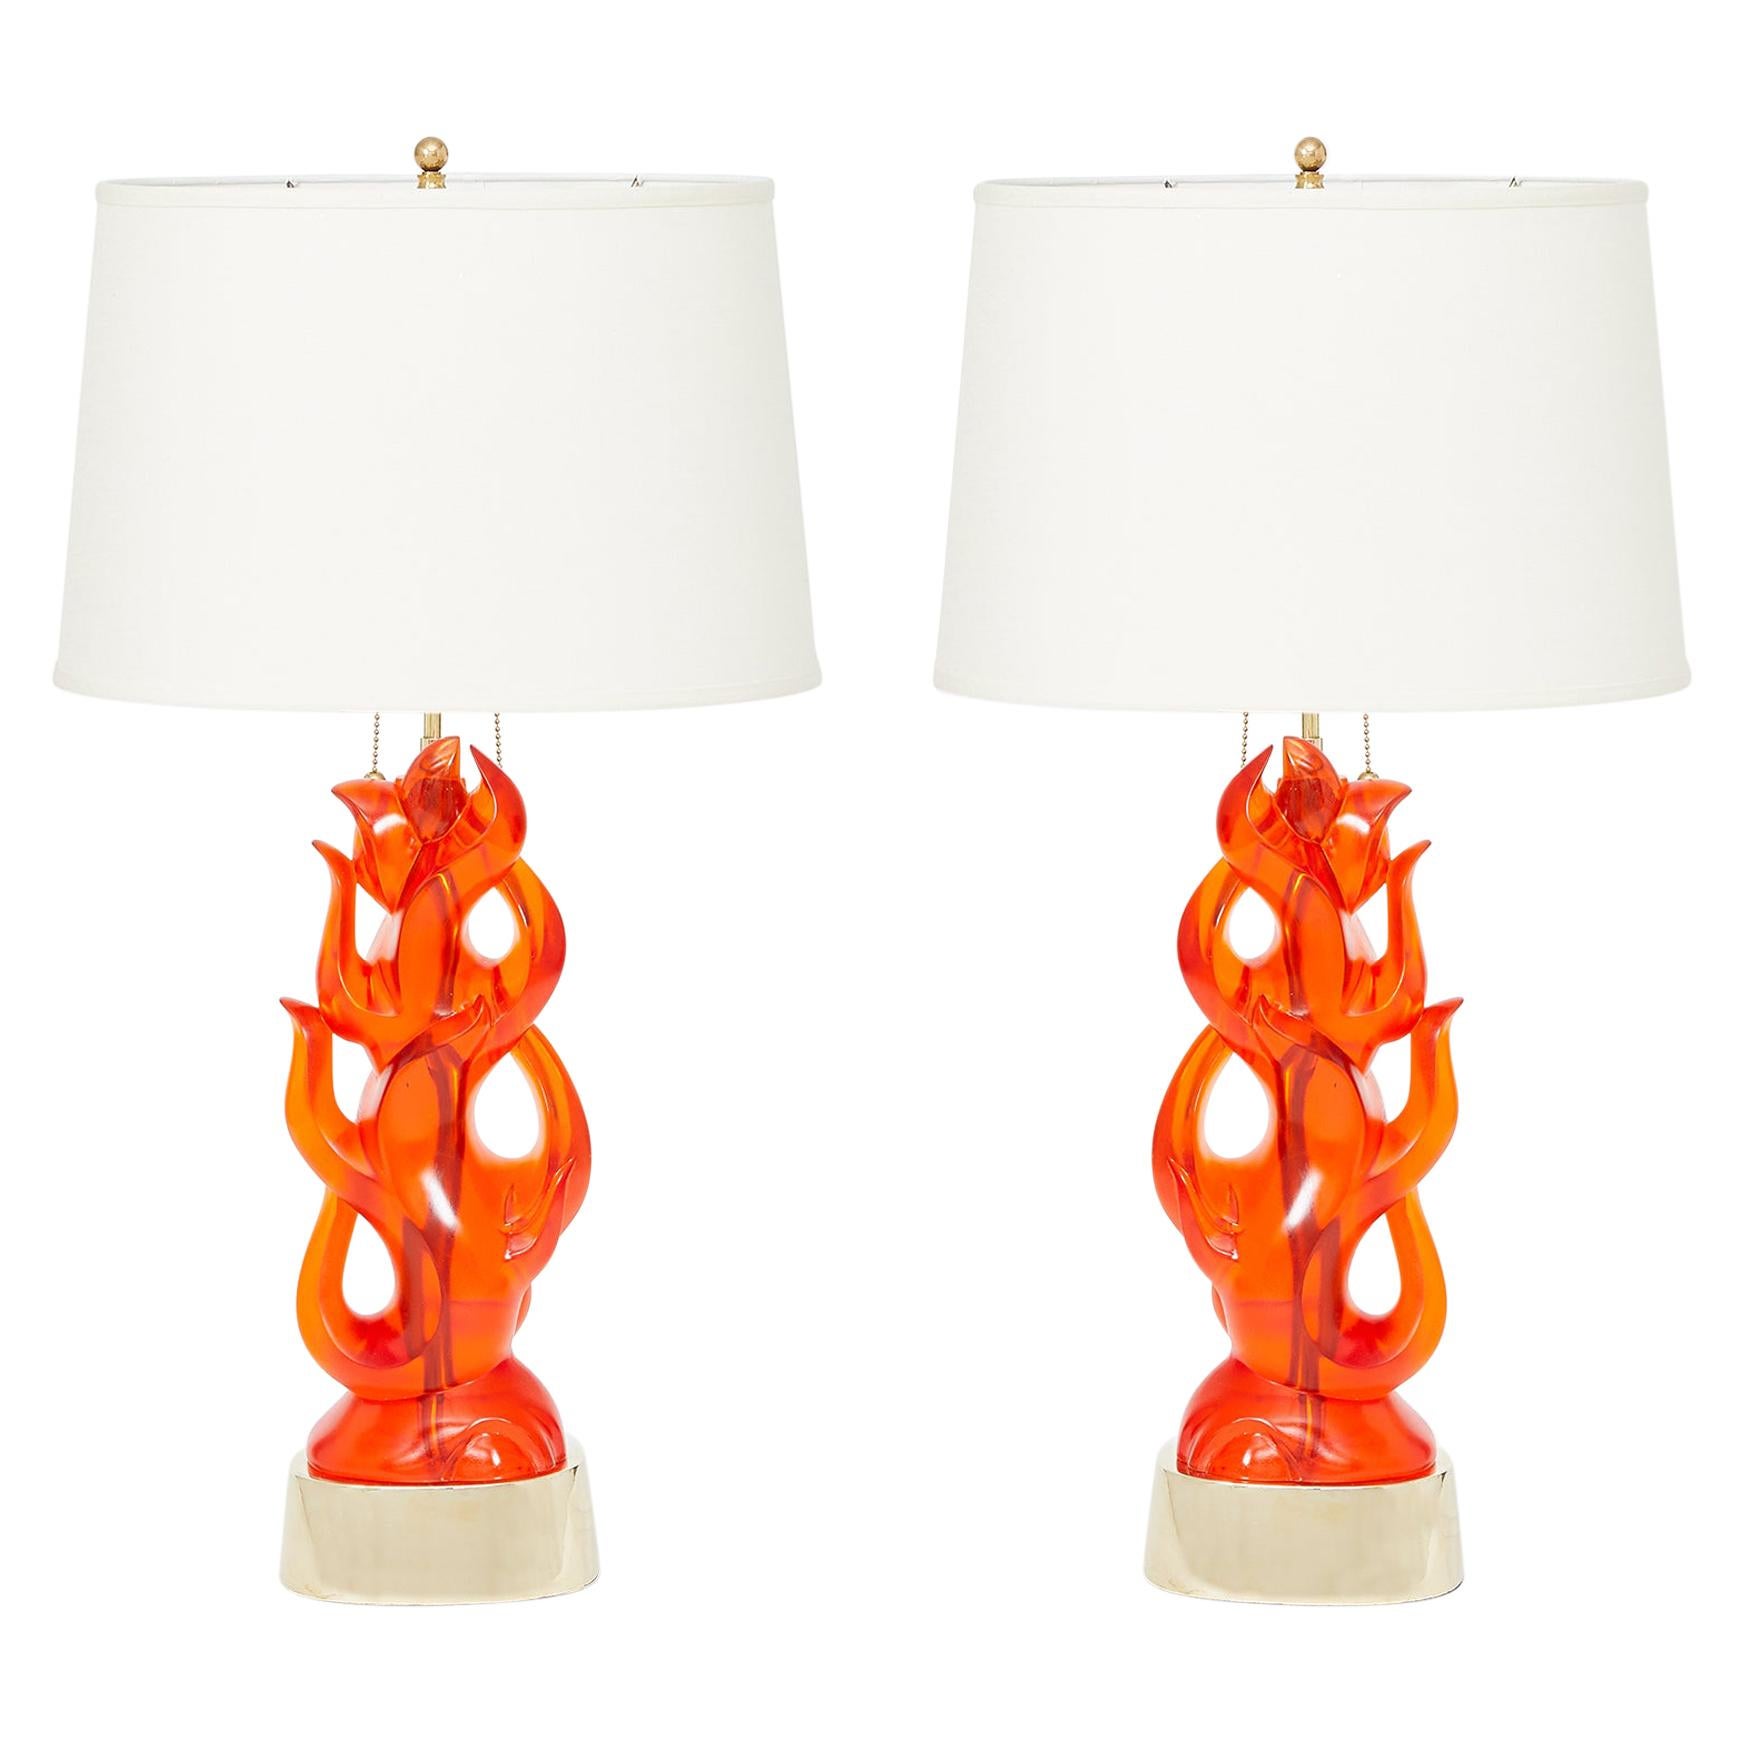 Pair of Candela Lamps in Coral by David Duncan Studio